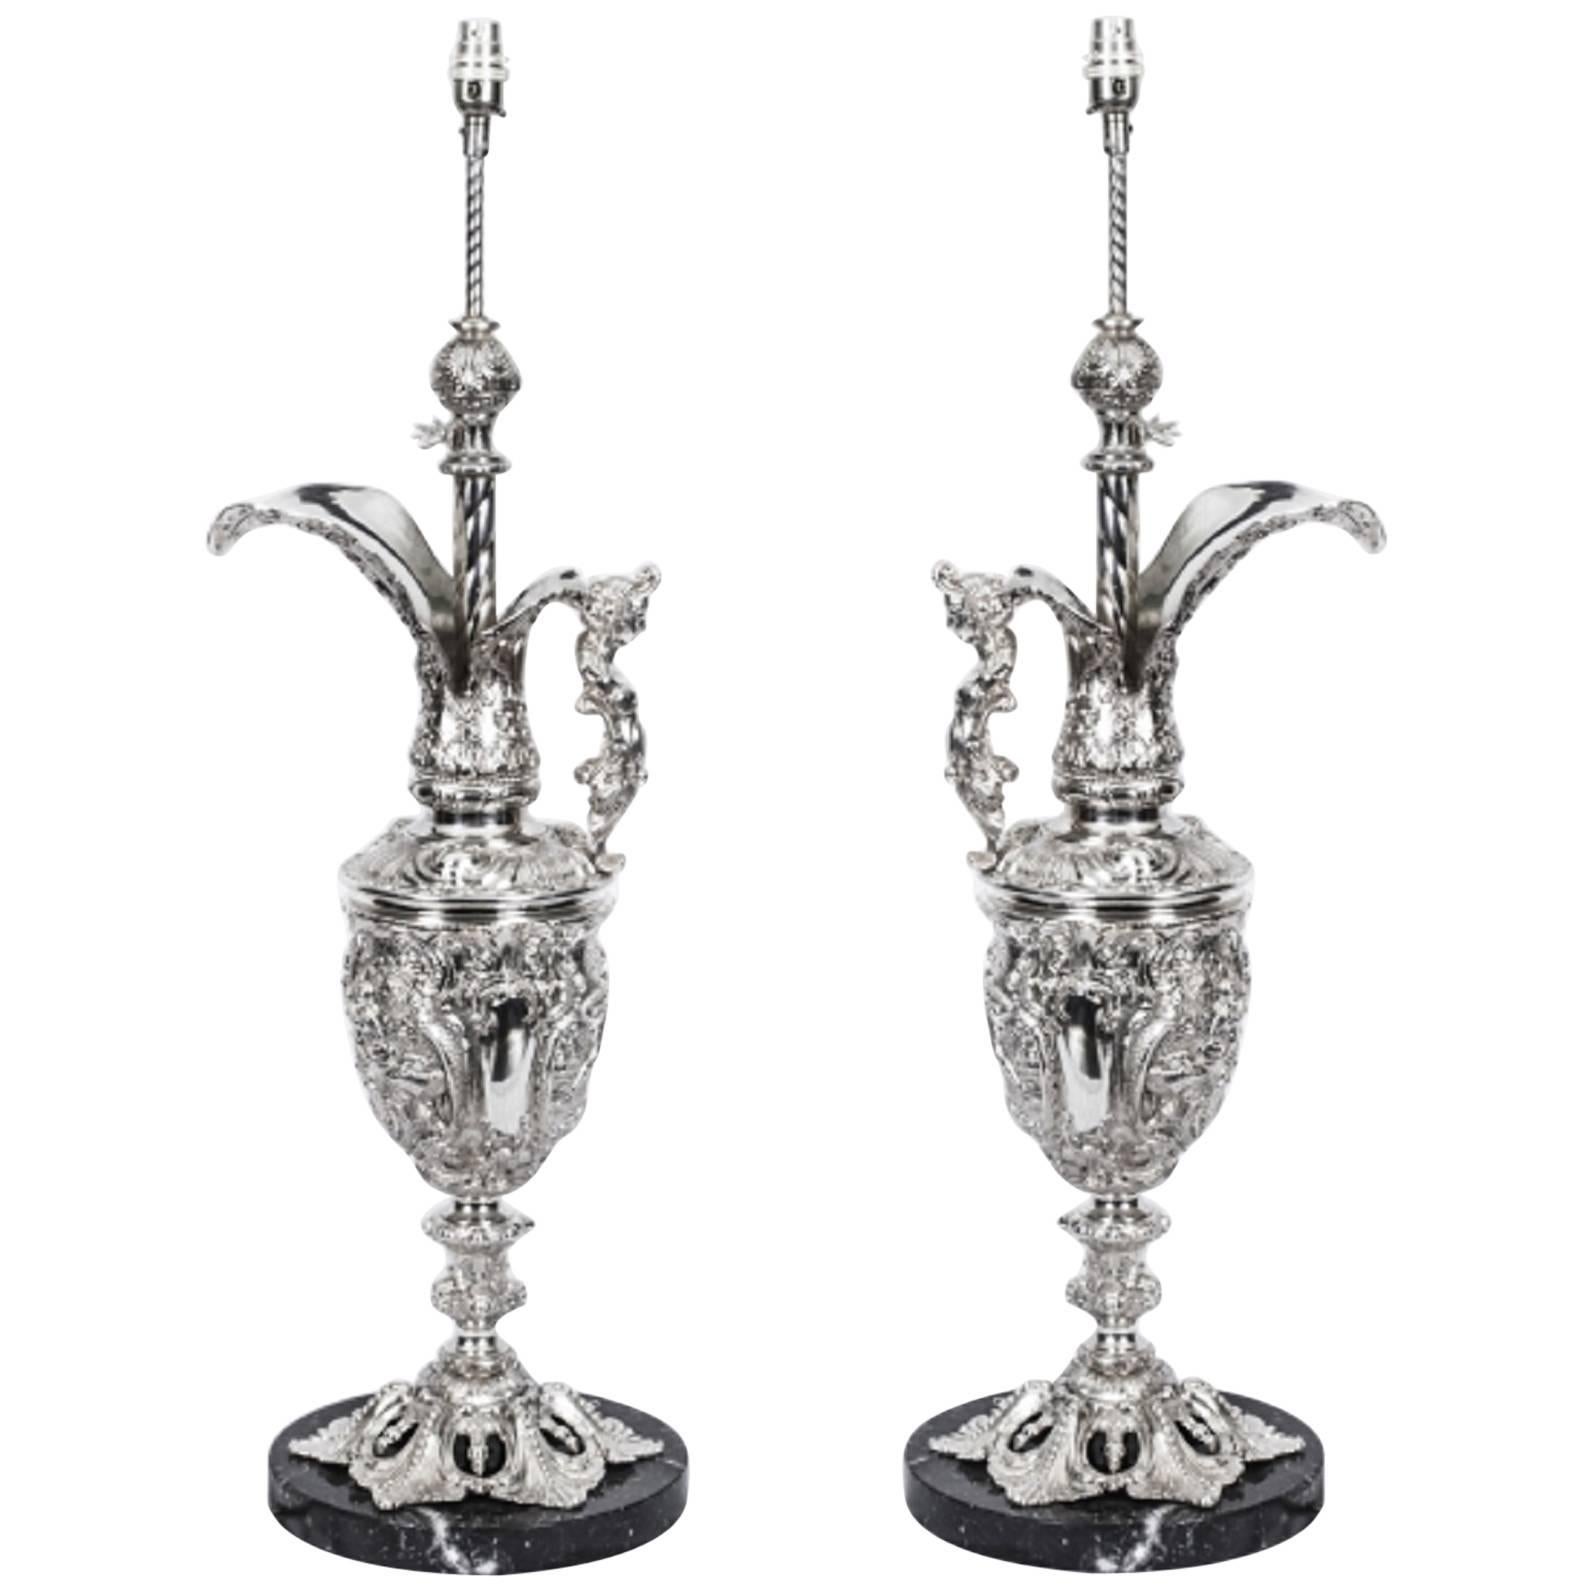 Antique Pair of Silver Plated Bronze Classical Urn Table Lamps, circa 1900